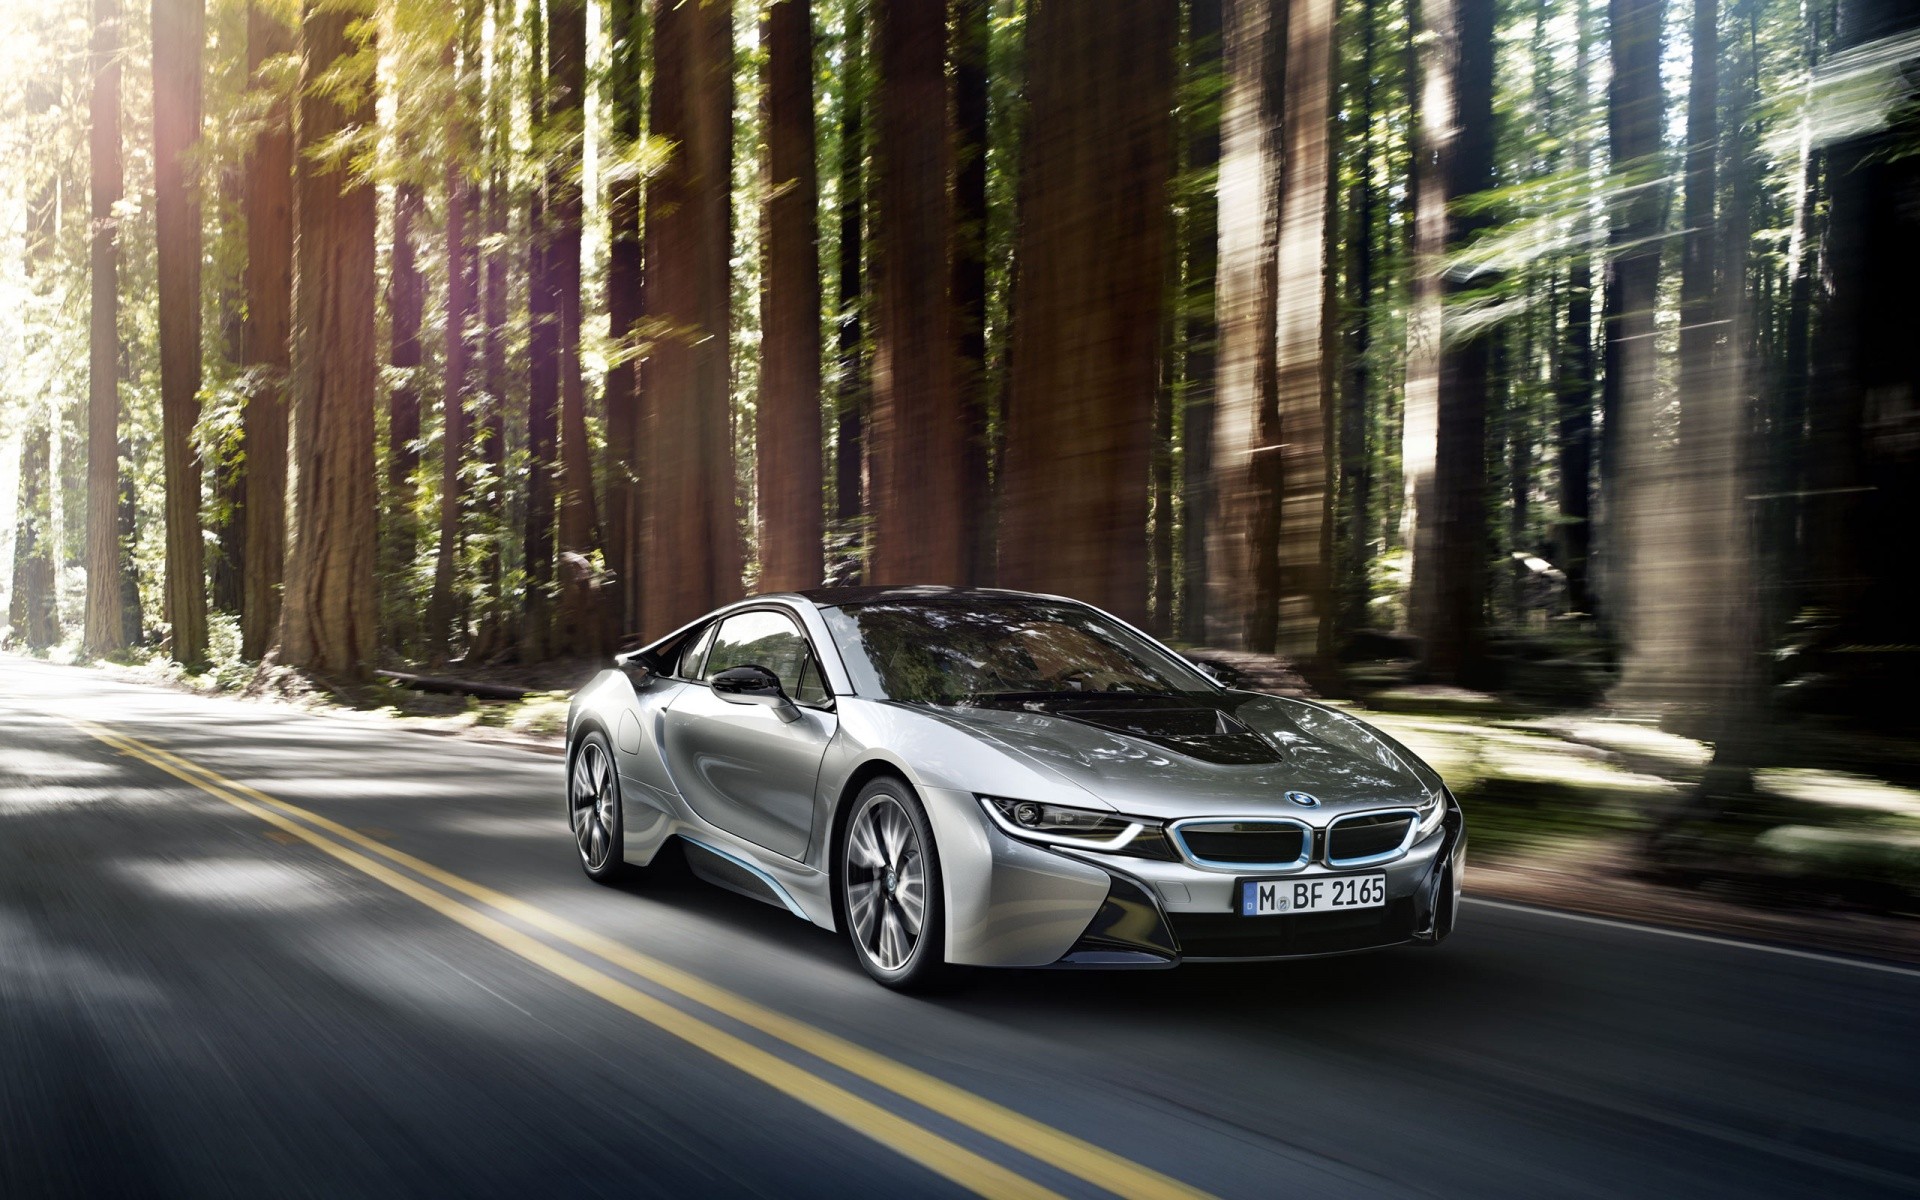 BMW, BMW I8, Road, Trees, Sunlight, Sports Car, Coupe Wallpaper